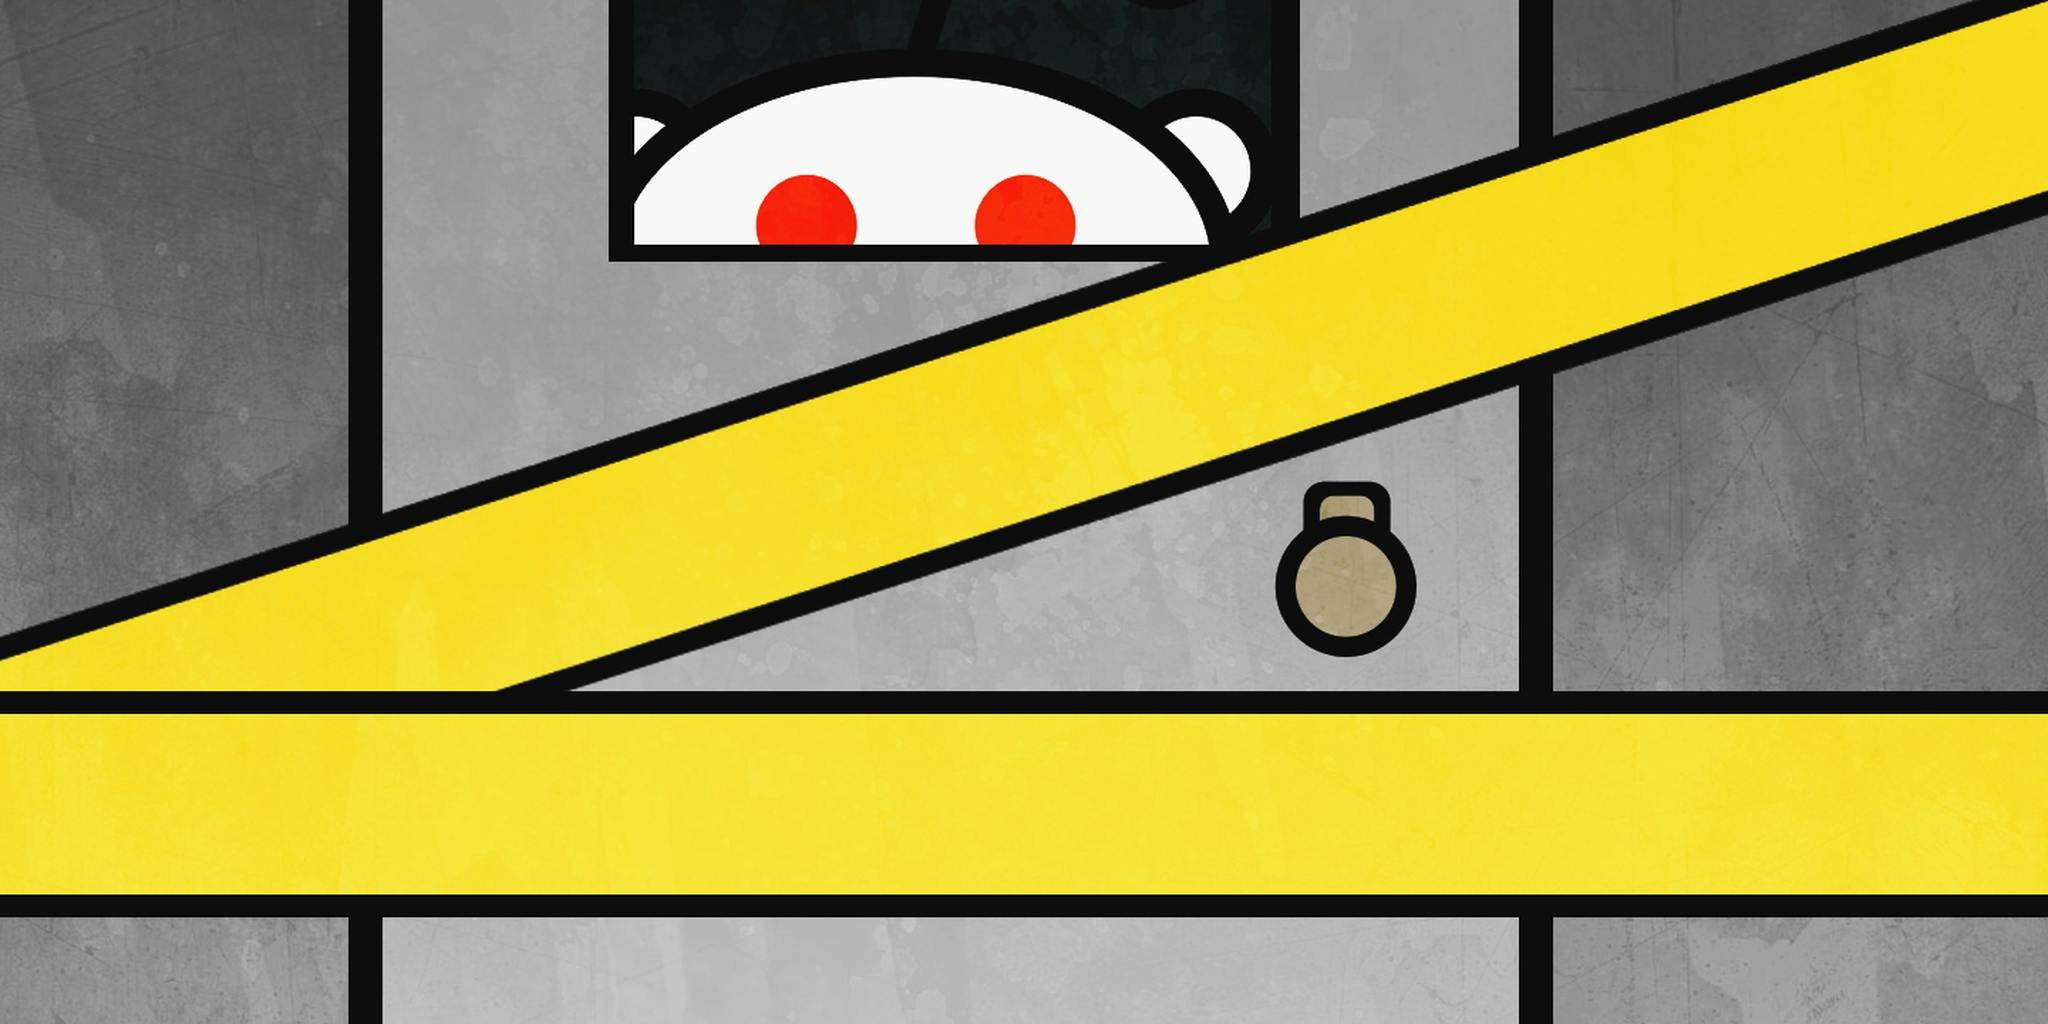 Reddit quarantines controversial subreddit r/candidfashionpolice following Daily Dot inquiry